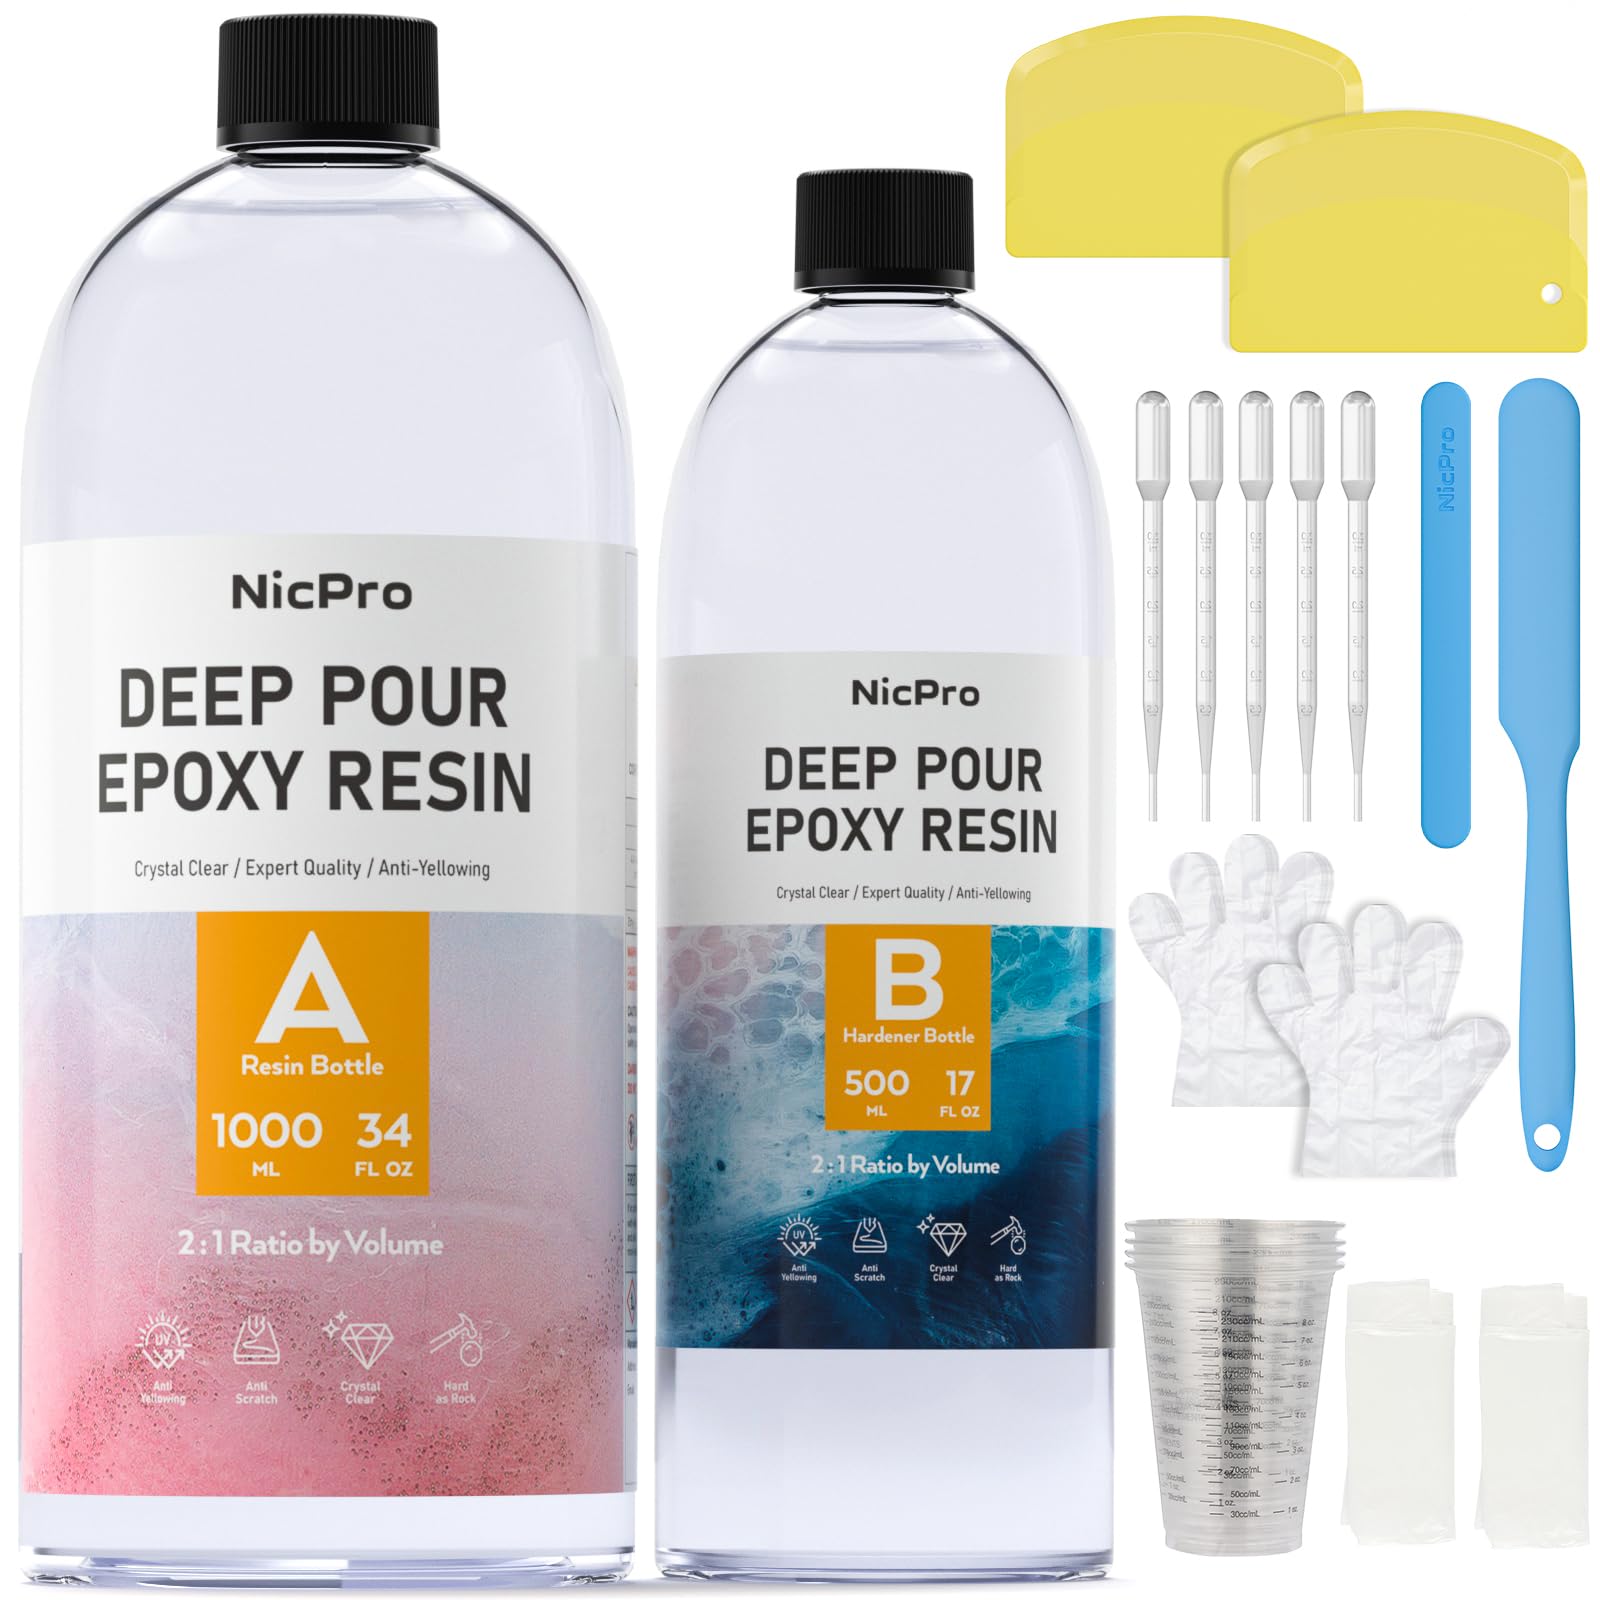 Nicpro 3 Gallon Deep Pour Epoxy Resin Kit, 2 to 4 Inch Depth Crystal C